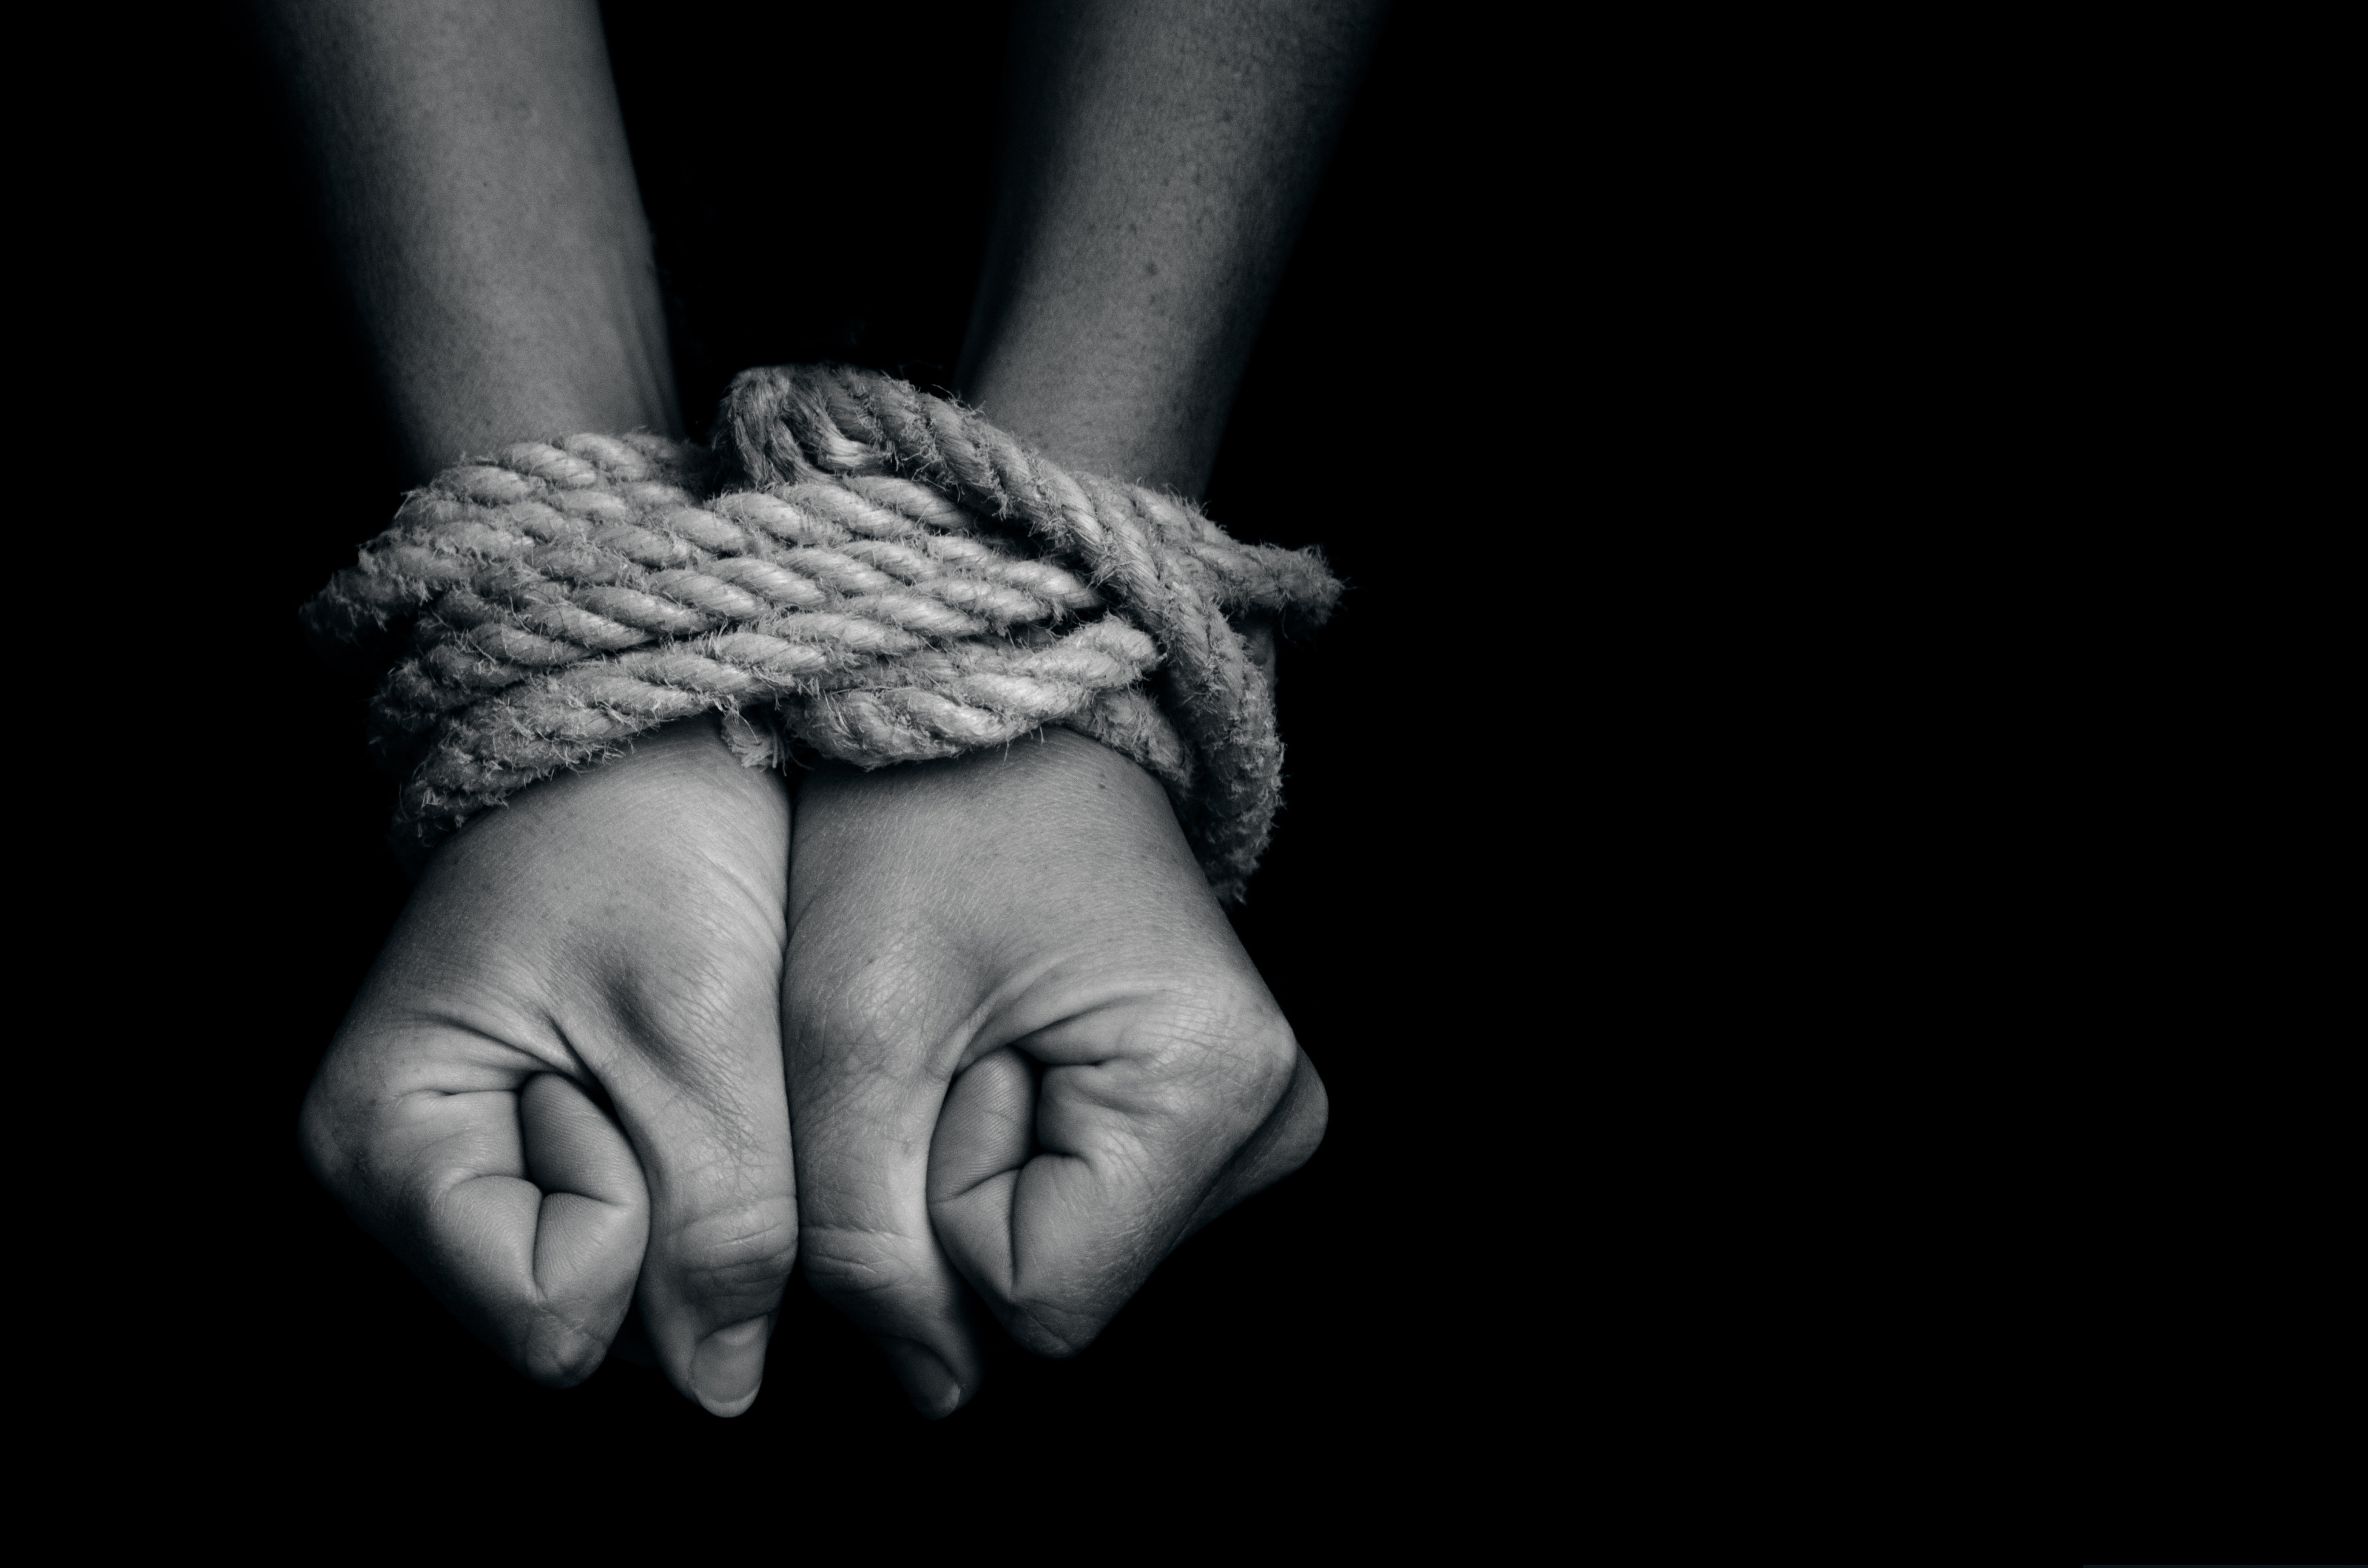 A UN report released on Monday said that nearly one out of every 150 people in the world are caught up in modern forms of slavery. Photo: Shutterstock